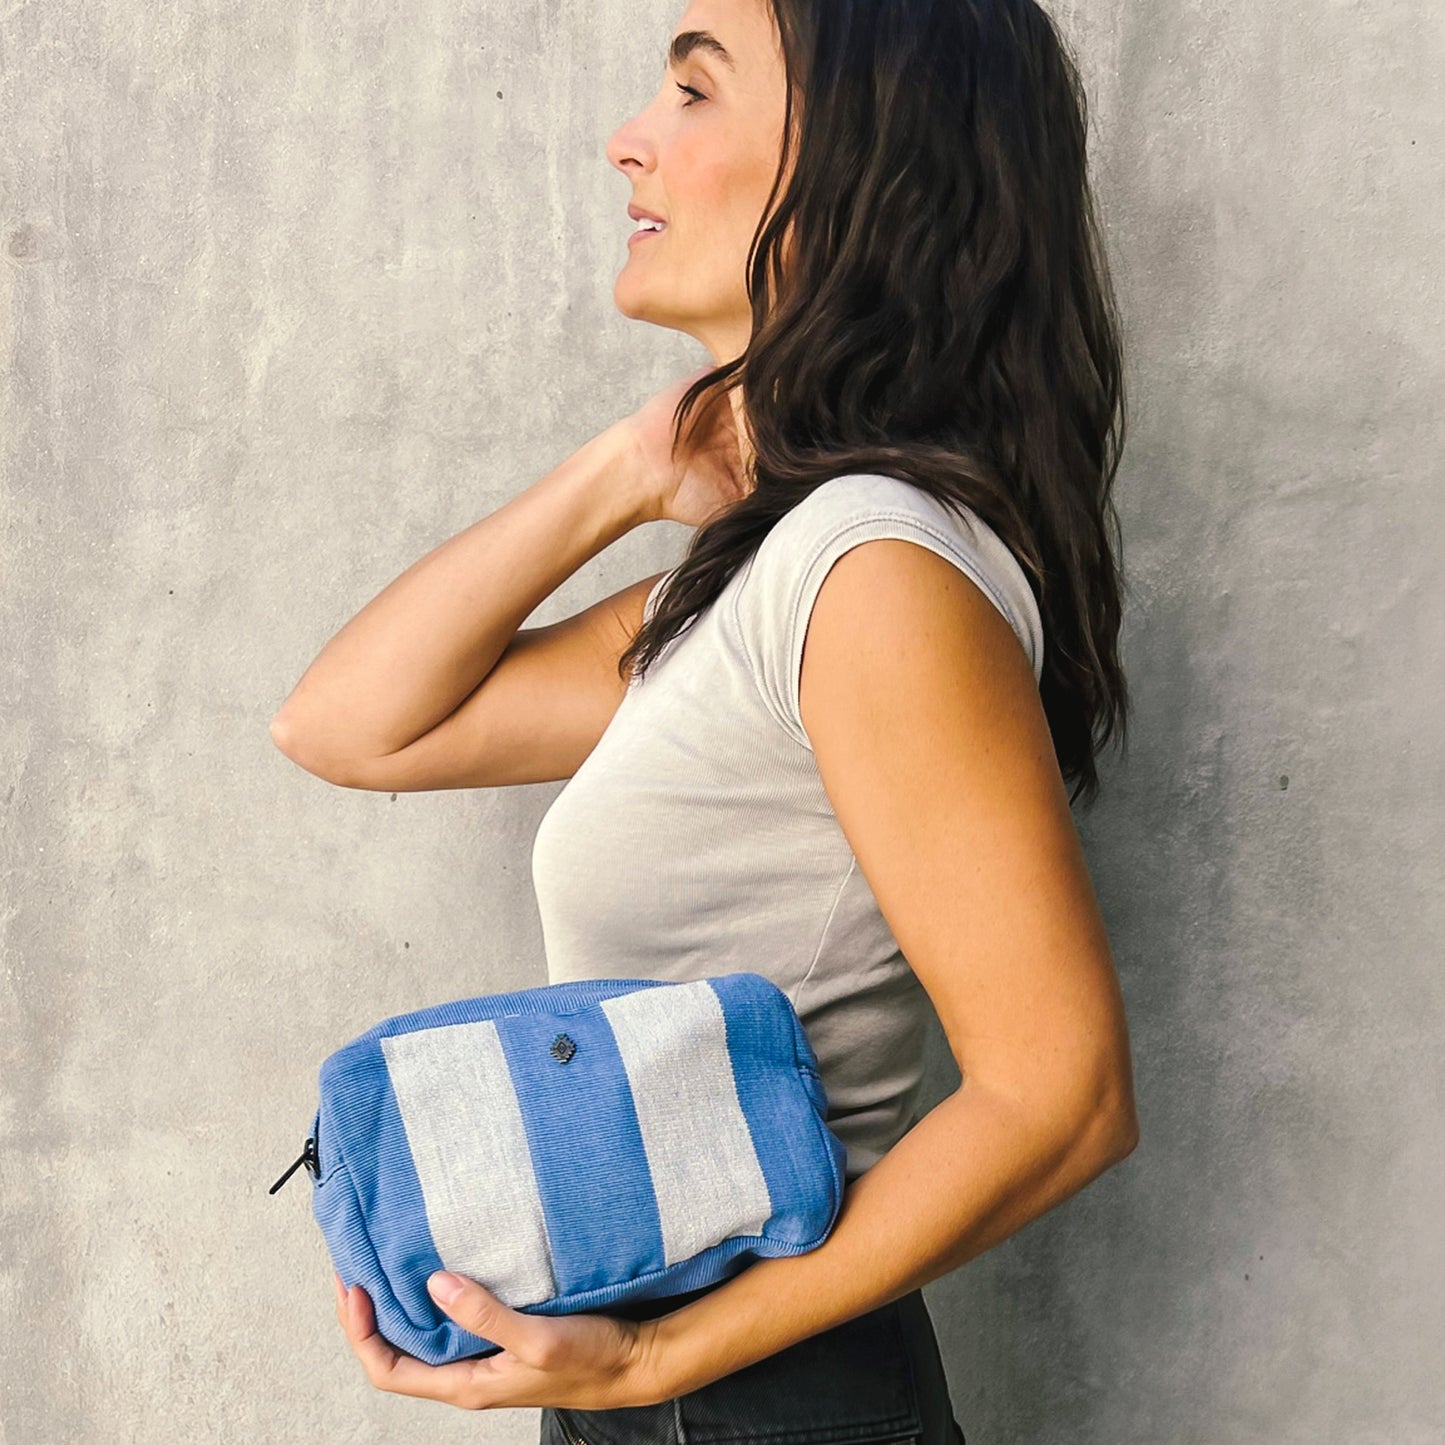 THE PERFECT WET BAG - SMALL - CABANA STRIPE - BLUE